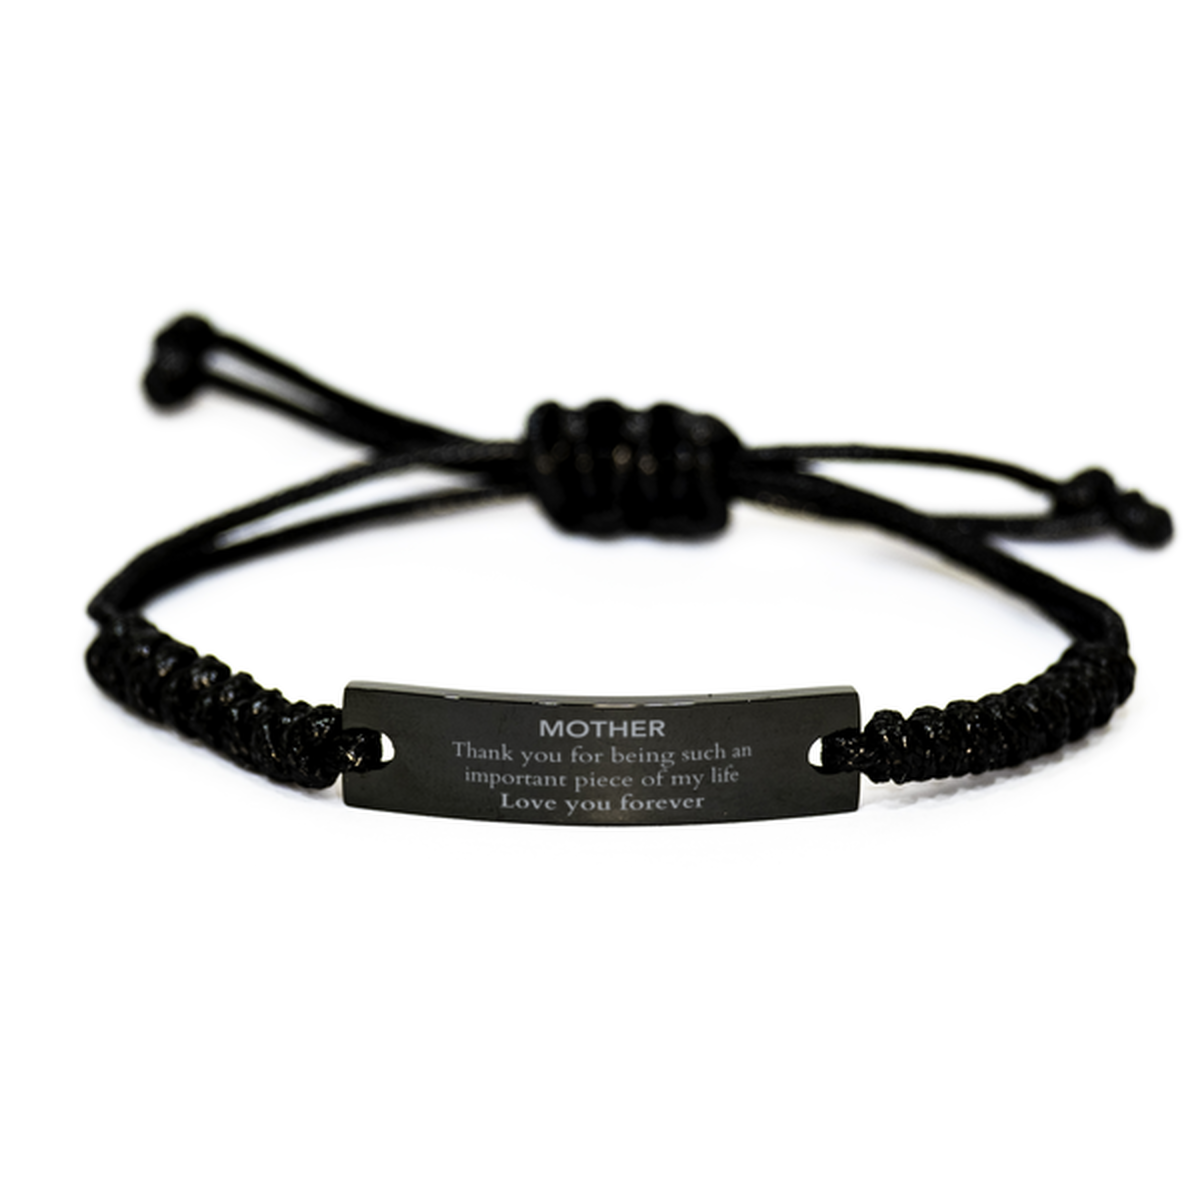 Appropriate Mother Black Rope Bracelet Epic Birthday Gifts for Mother Thank you for being such an important piece of my life Mother Christmas Mothers Fathers Day